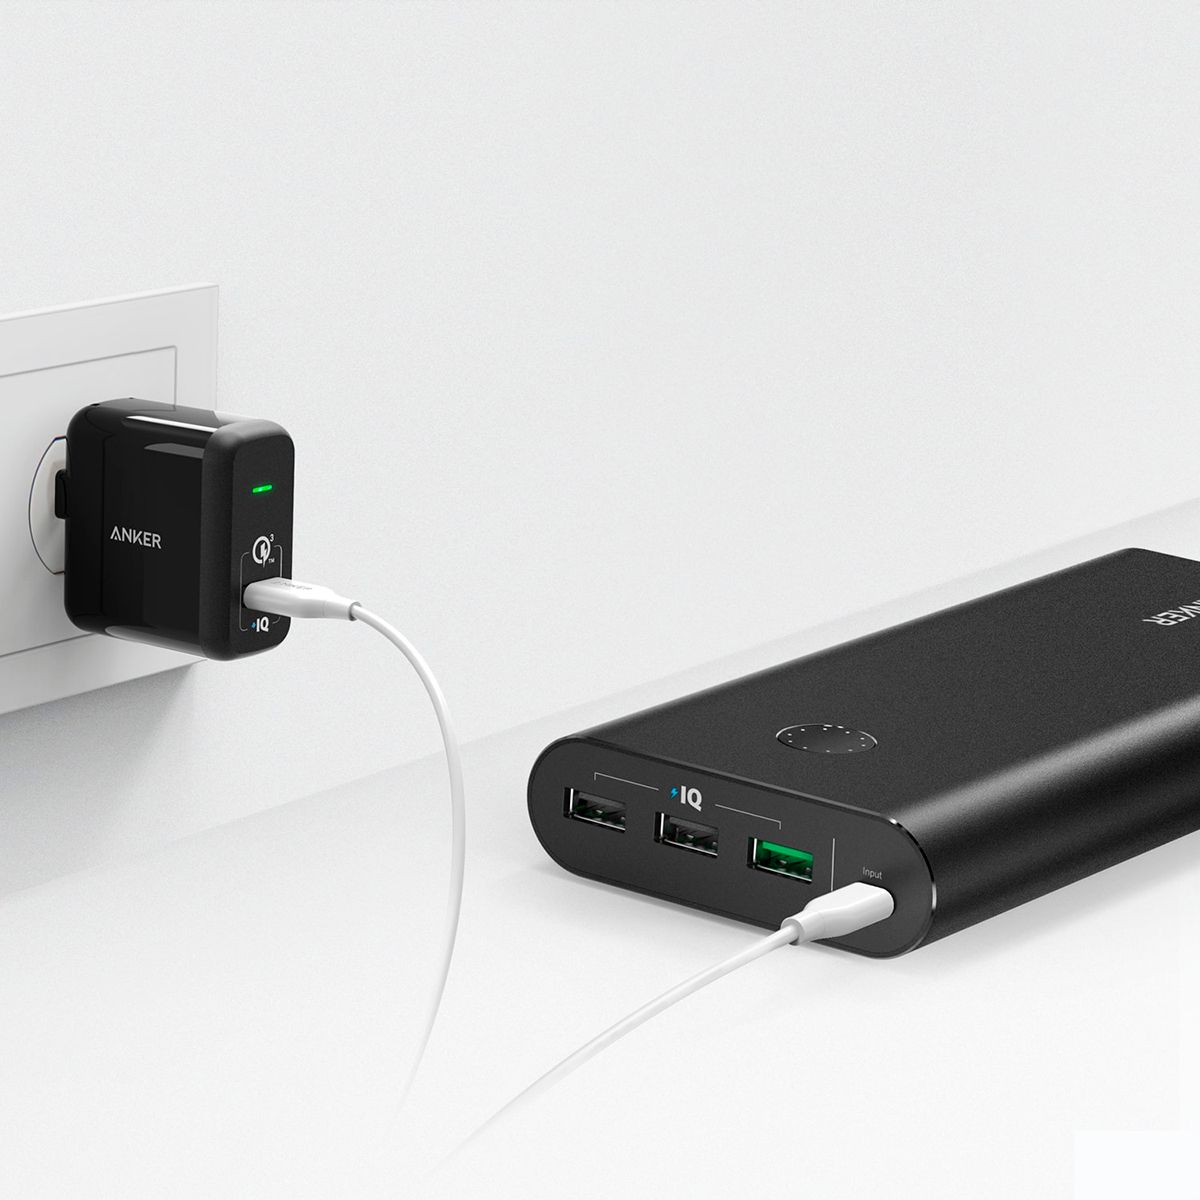 How to Use a Power Bank - Anker US